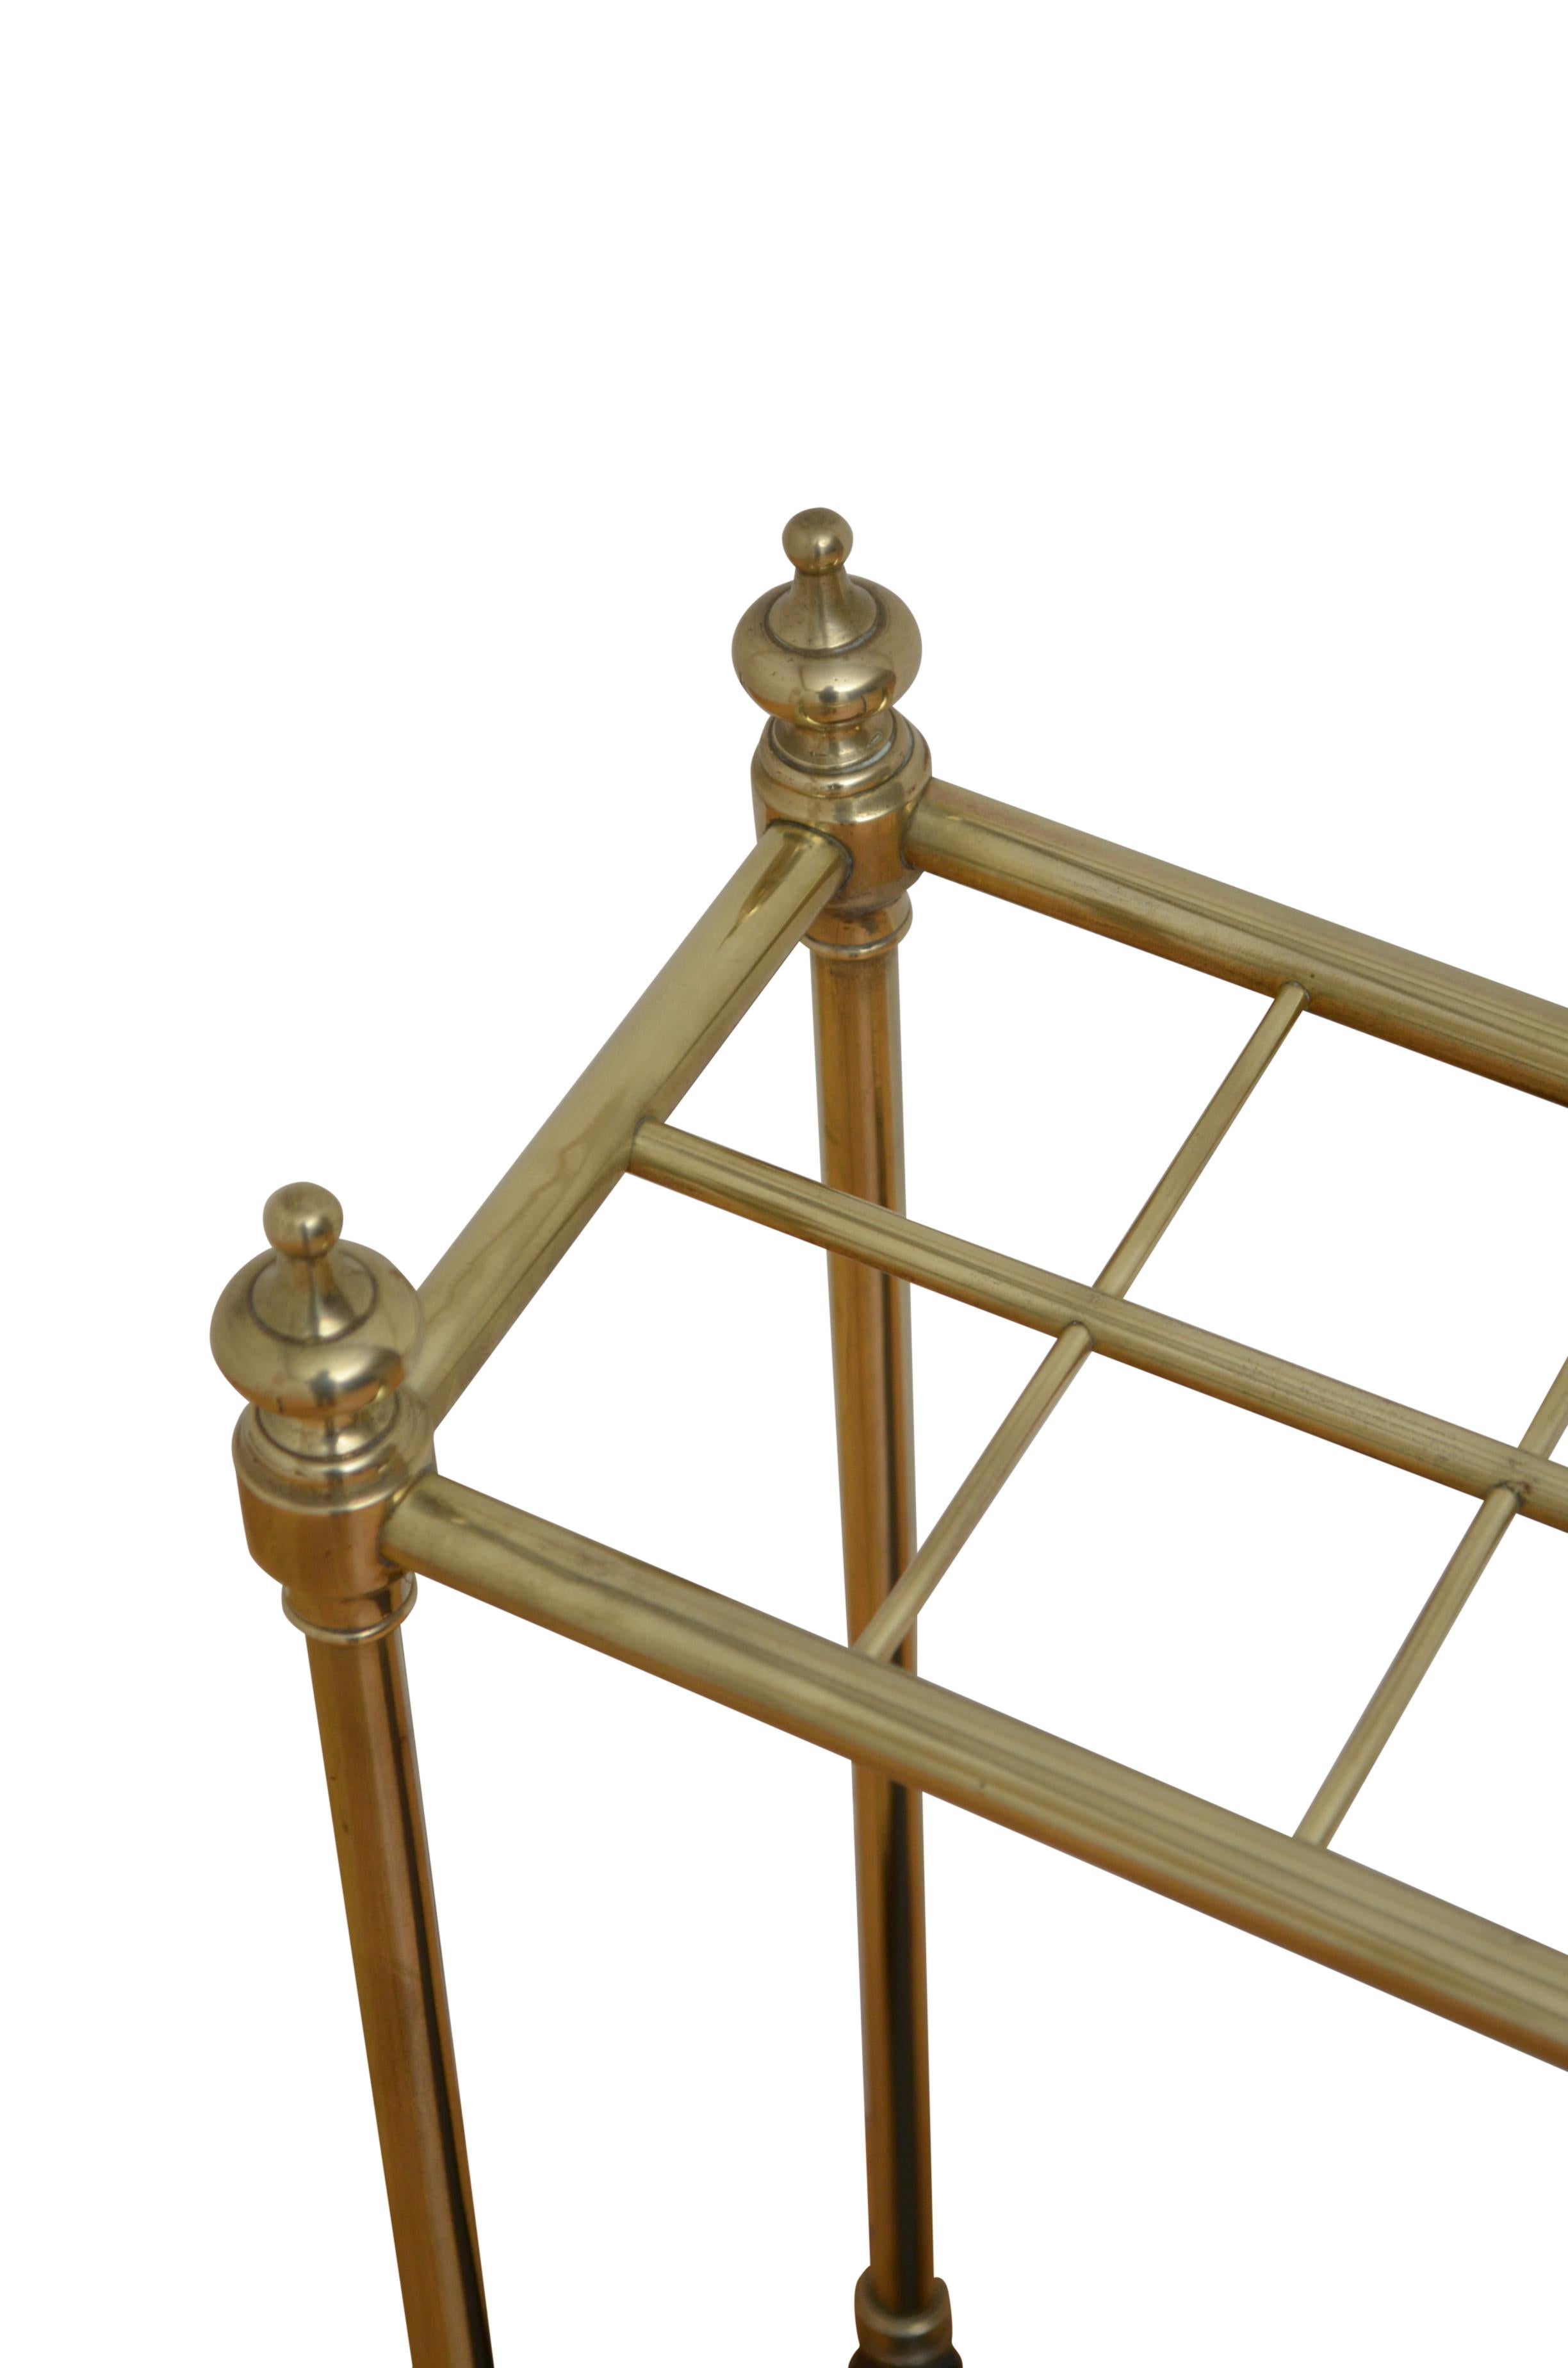 K0556 Victorian umbrella stand in brass having twelve umbrella or walking sticks divisions flanked by finials and cast iron drip tray with dog tooth decoration. This antique umbrella stand has been cleaned and polished and is ready to place at home.